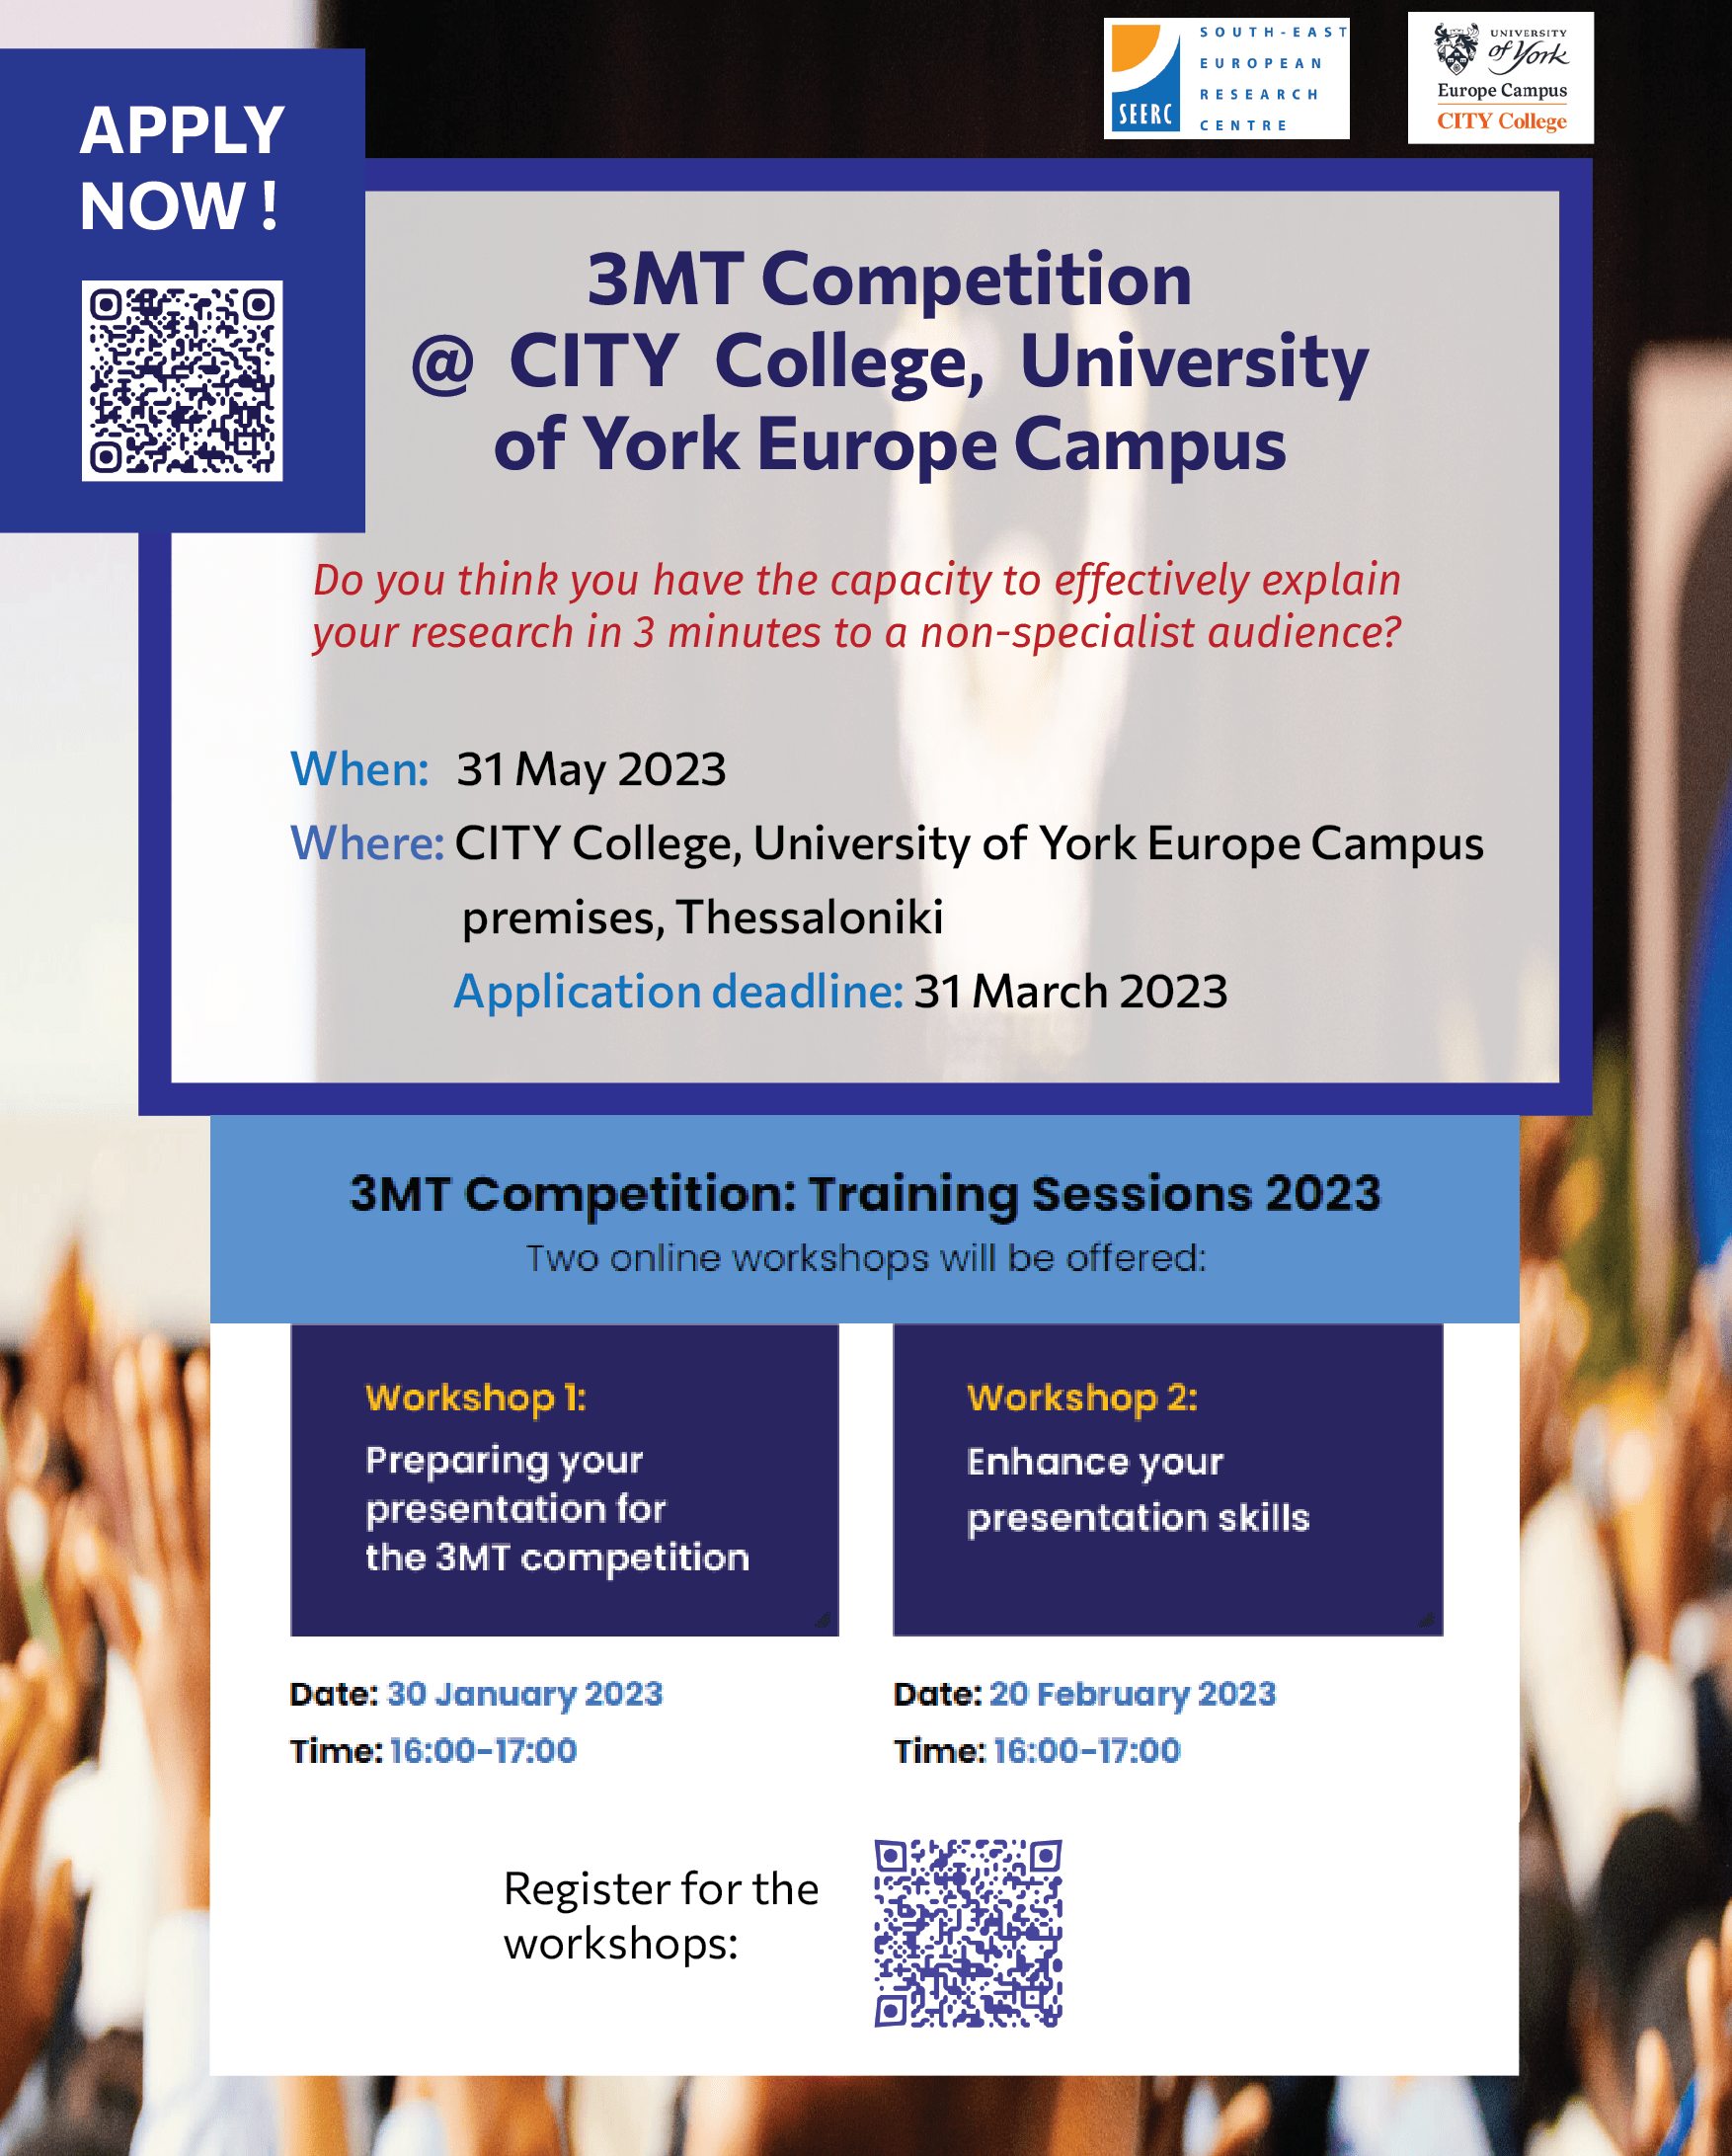  3MT Competition @ CITY College, University of York Europe Campus